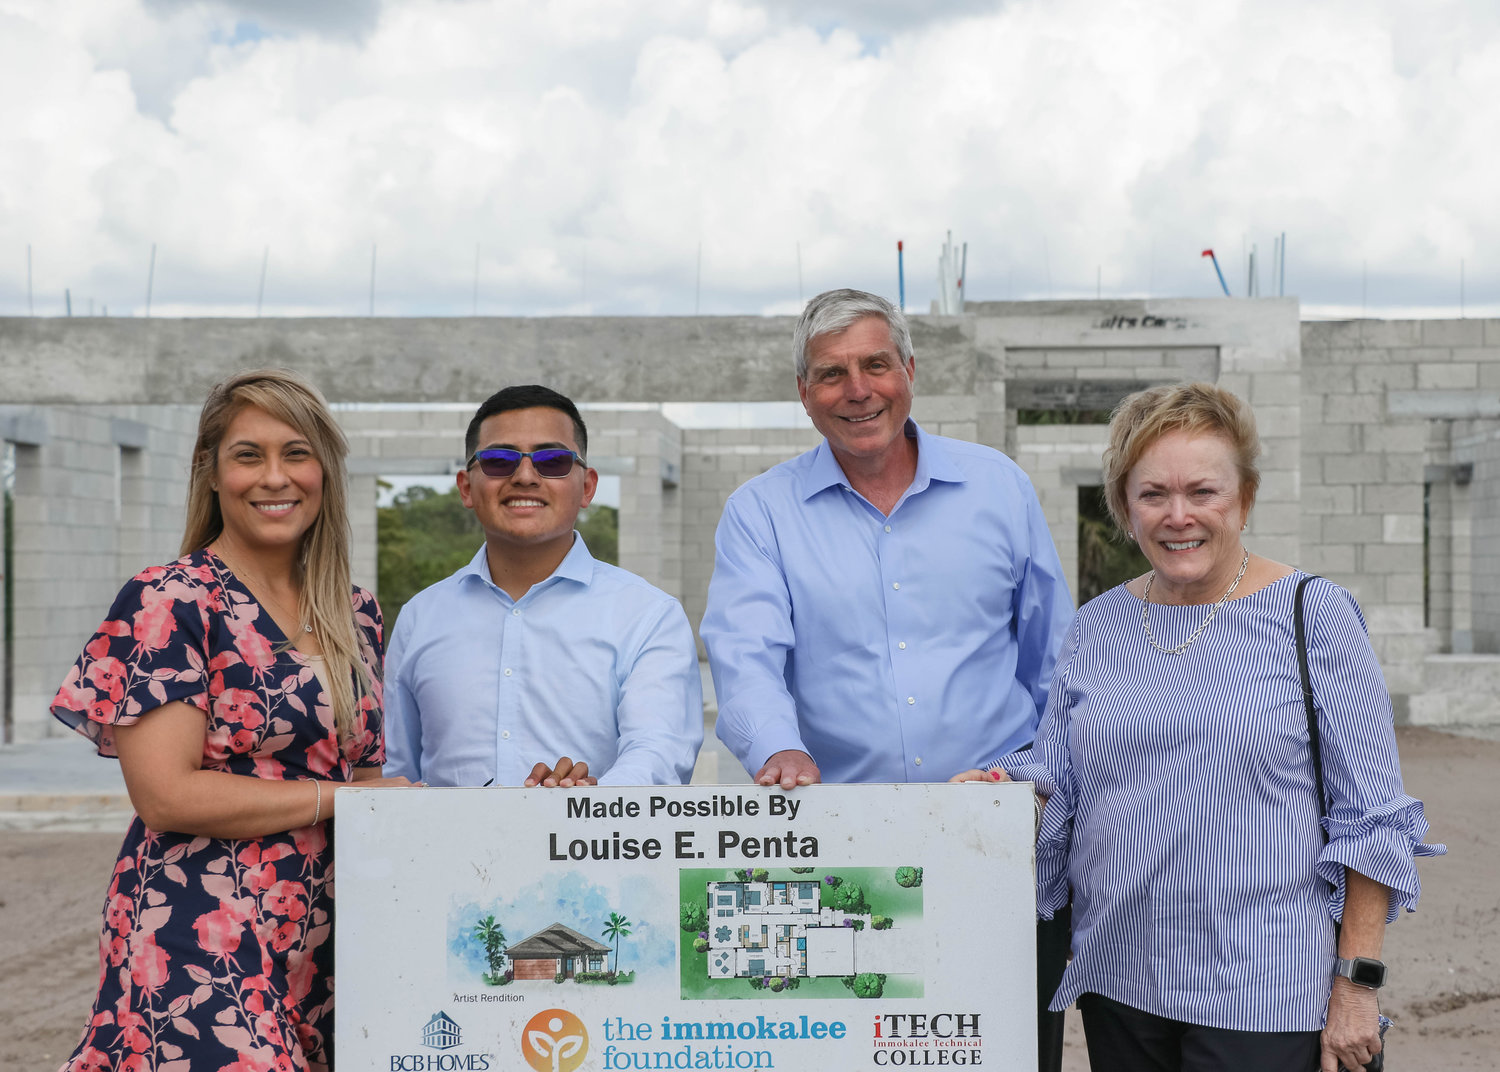 Immokalee Foundation President and CEO Noemi Y. Perez, Engineering & Construction Management Pathway alumni Daniel Trejo, Operations Director Walt Buchholtz, and Louise Penta in front of The Career Pathways Learning Lab she underwrote.